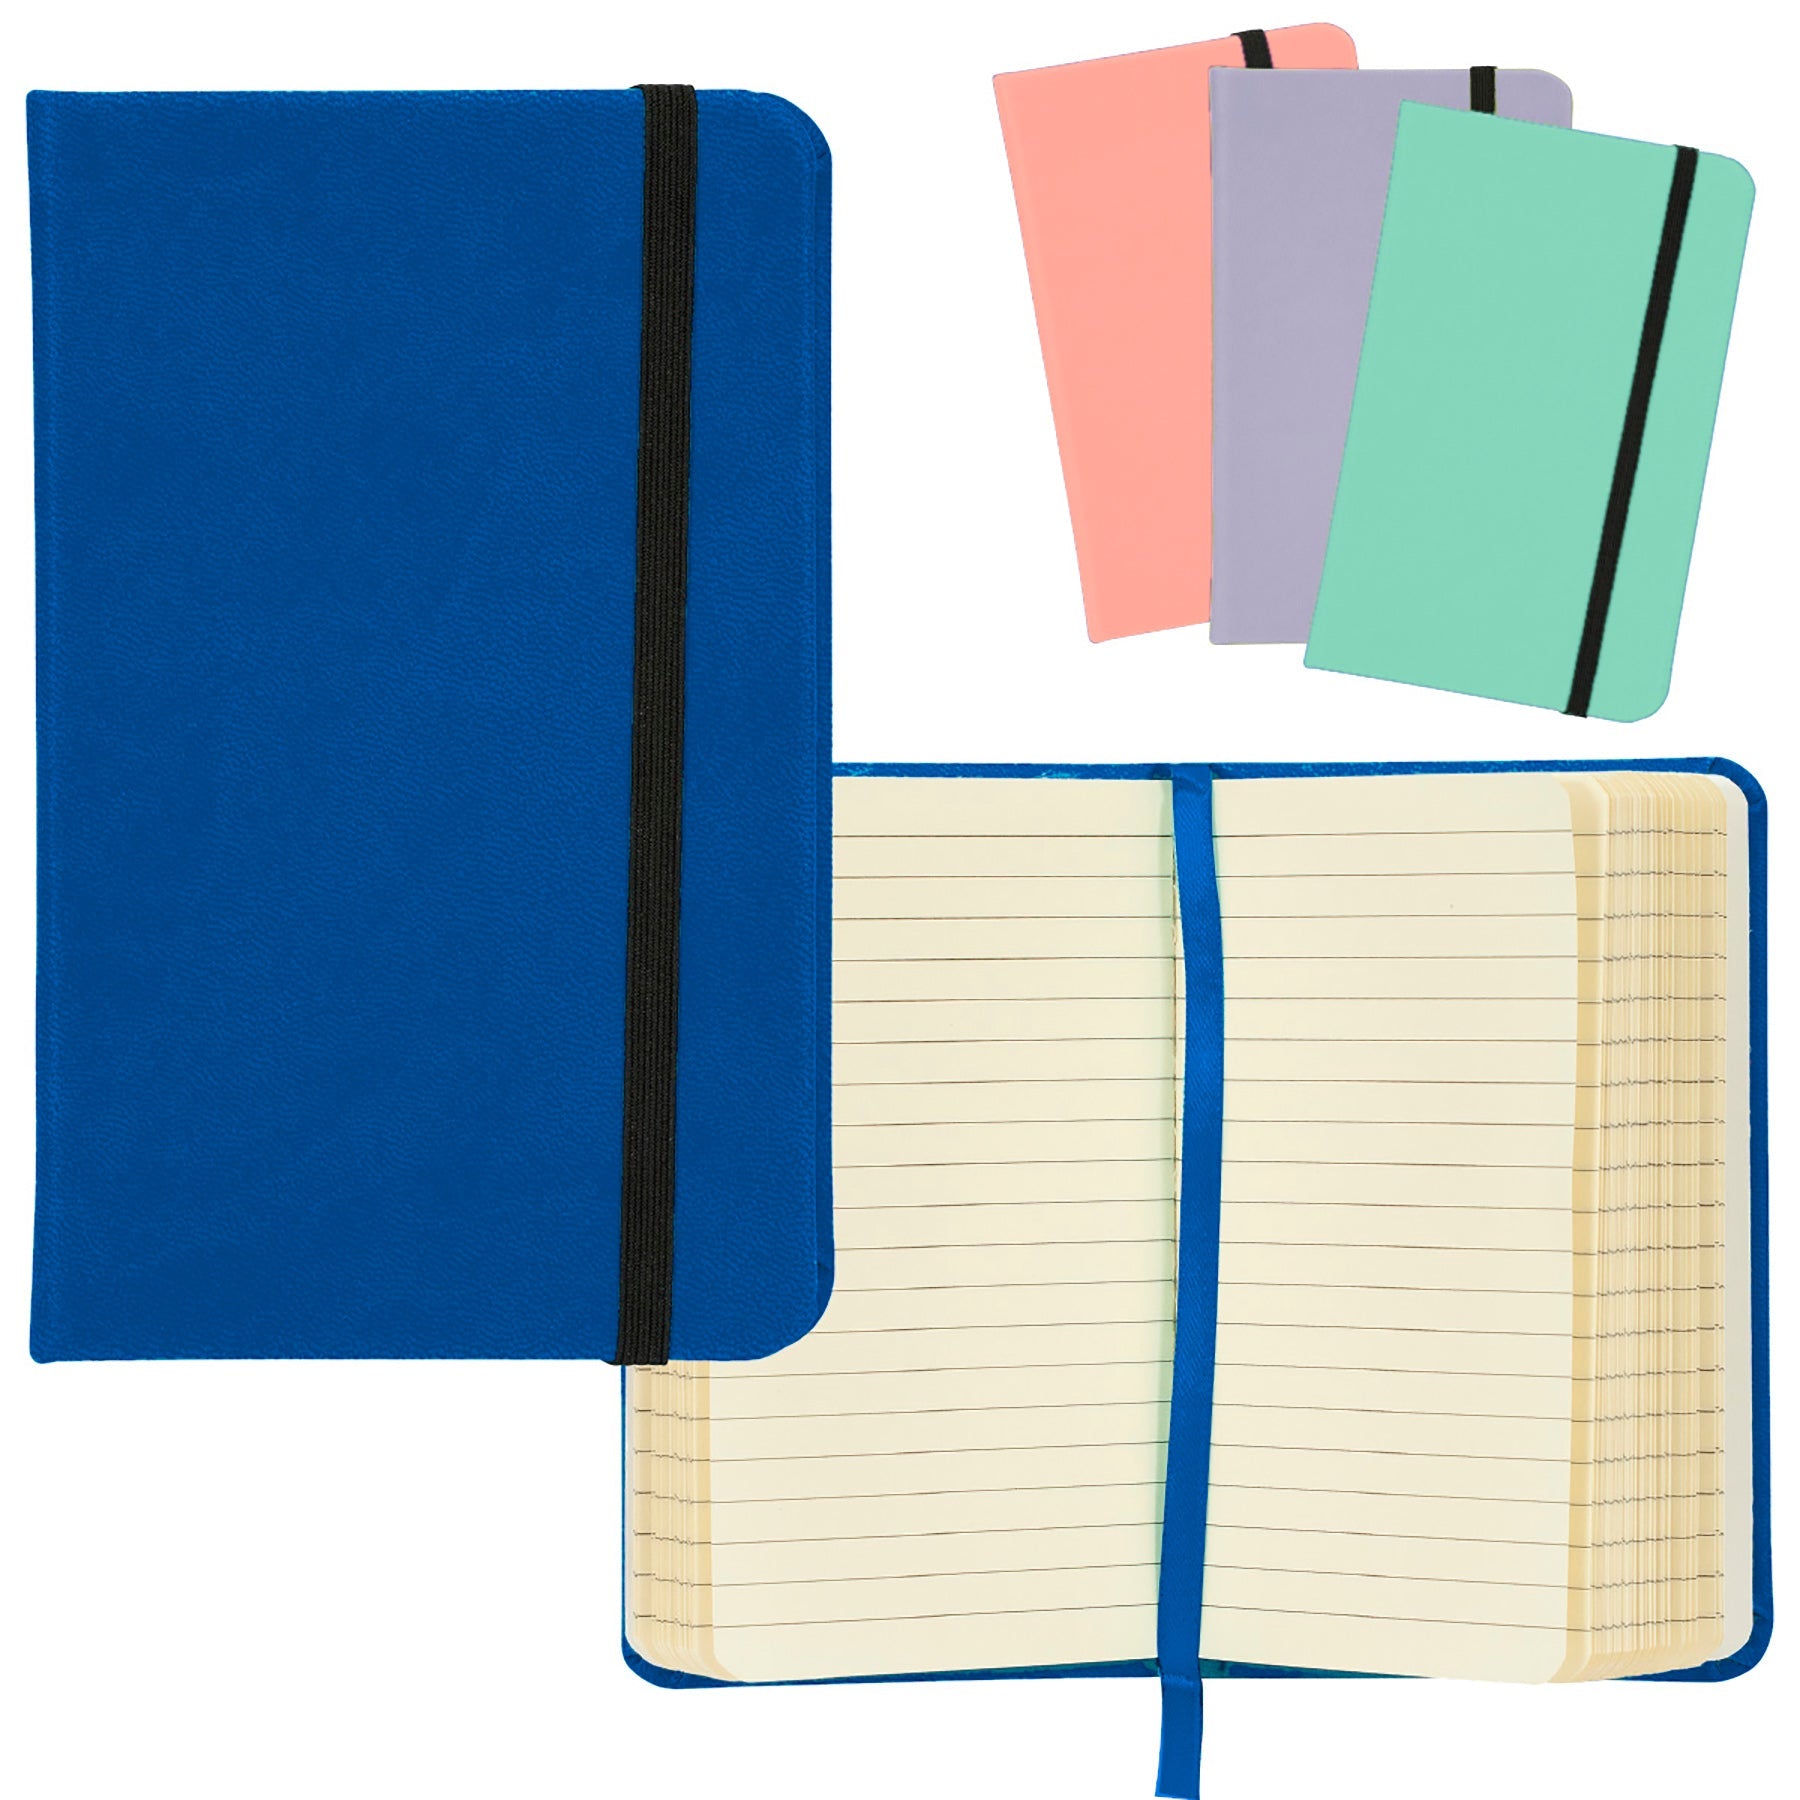 Merangue Hard Cover Notebook Lined 192 Pages 3.5x5.25in